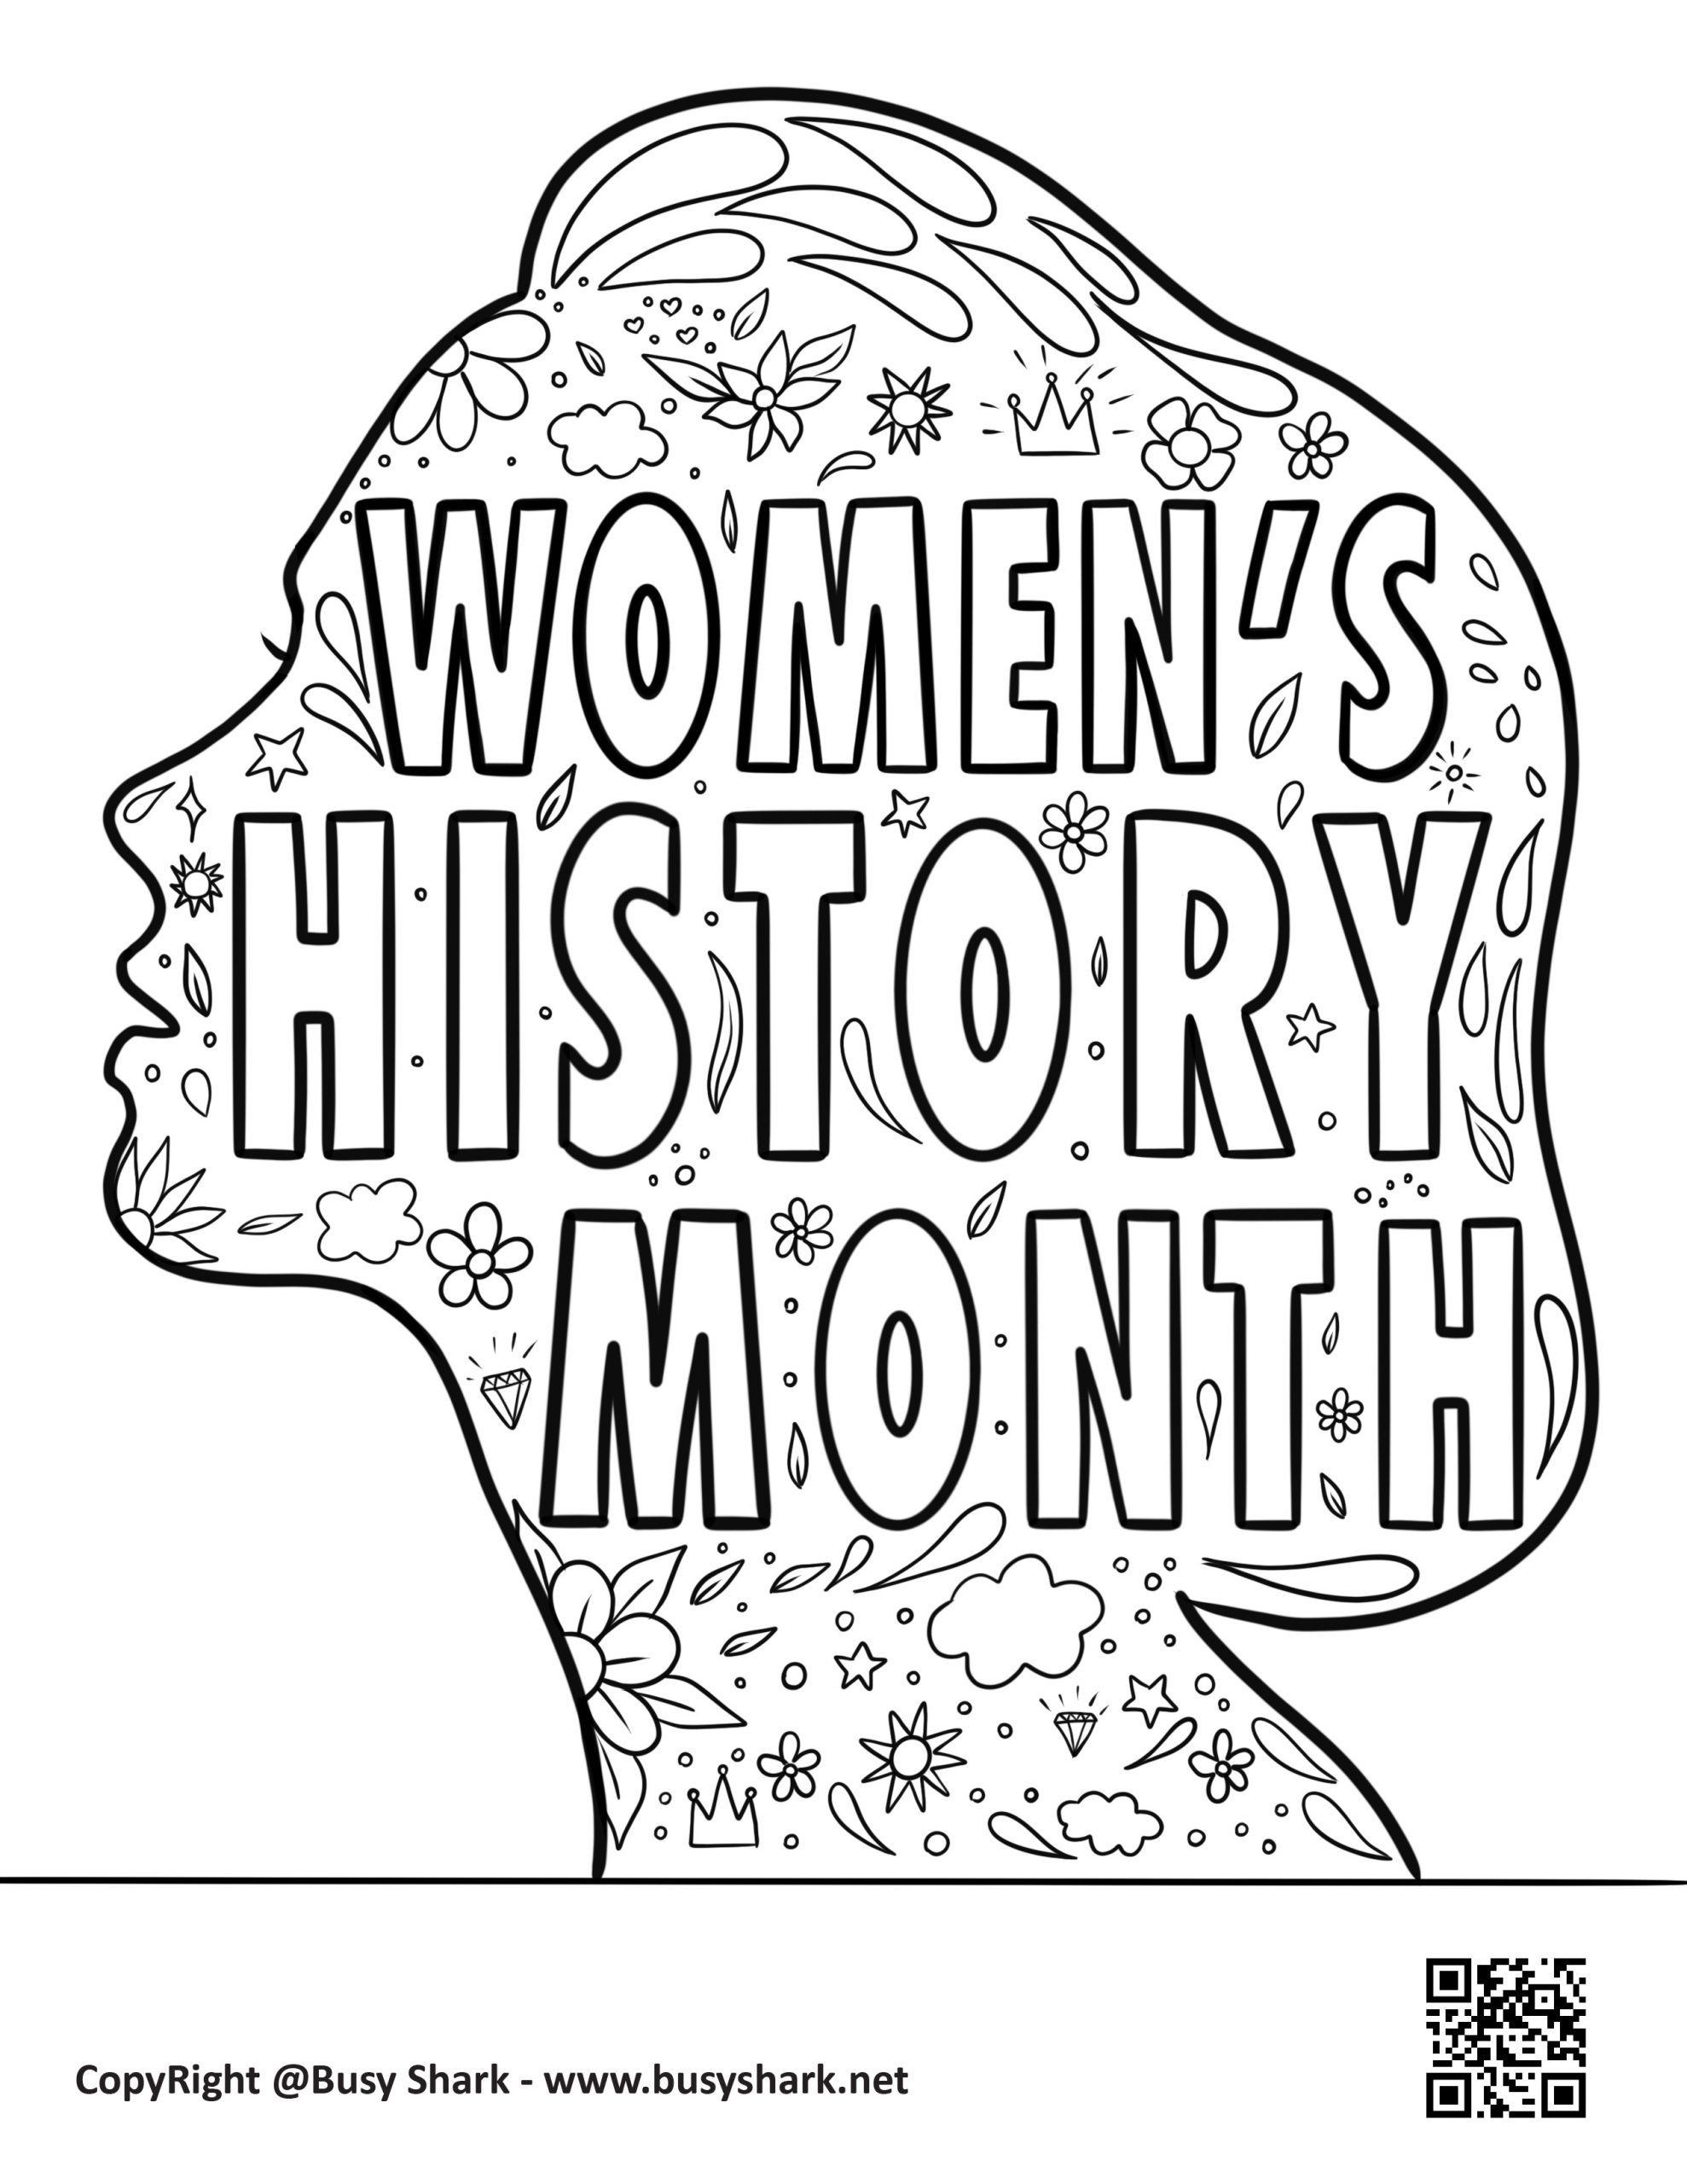 Womens history month coloring page free printable